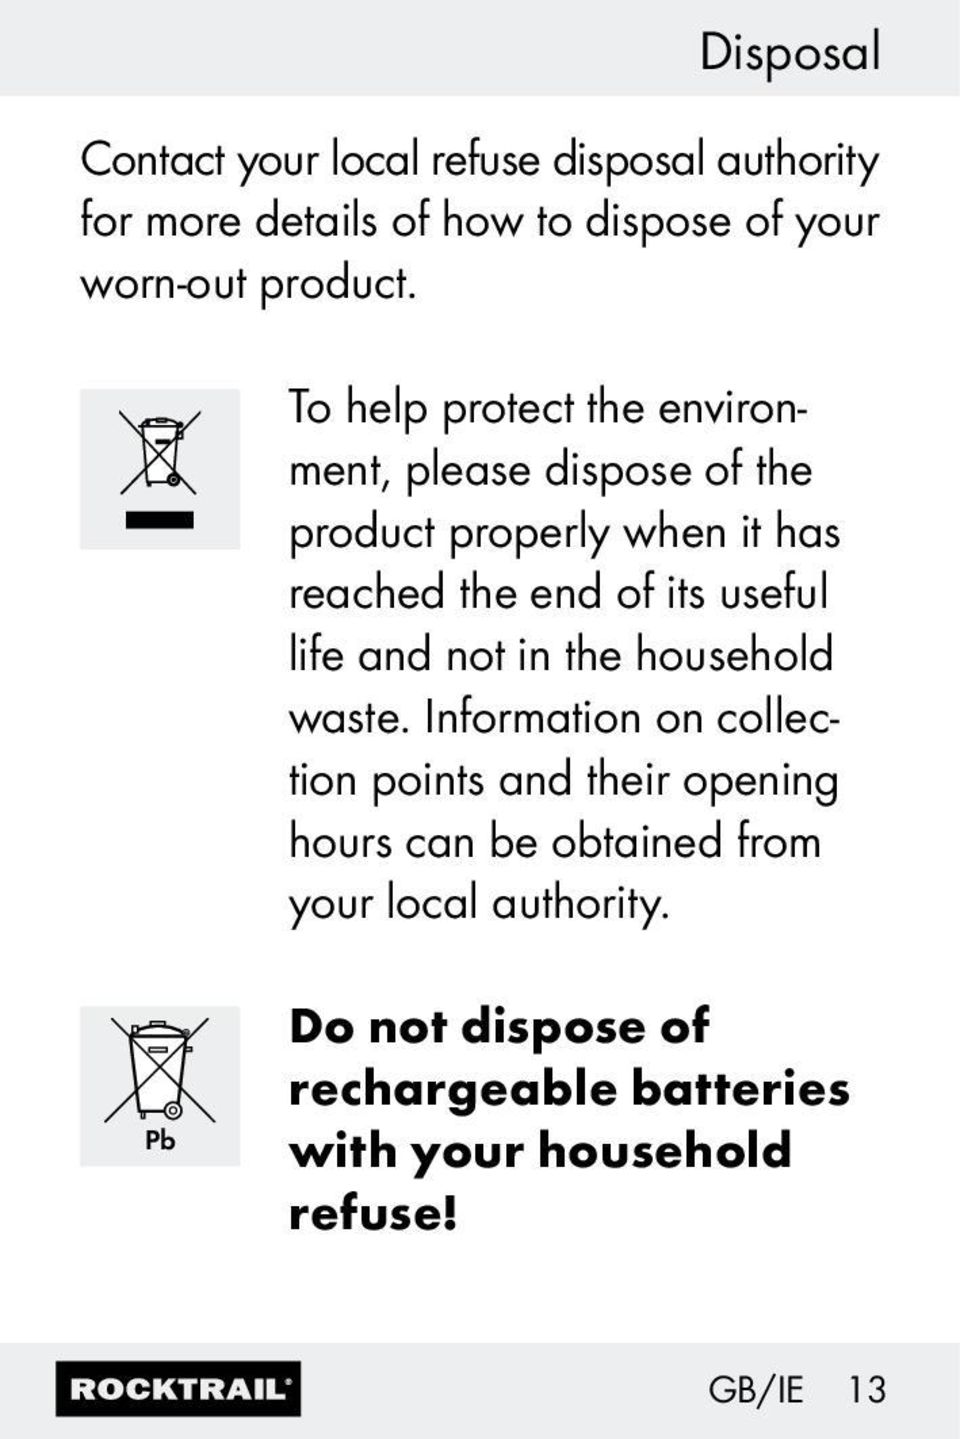 To help protect the environment, please dispose of the product properly when it has reached the end of its